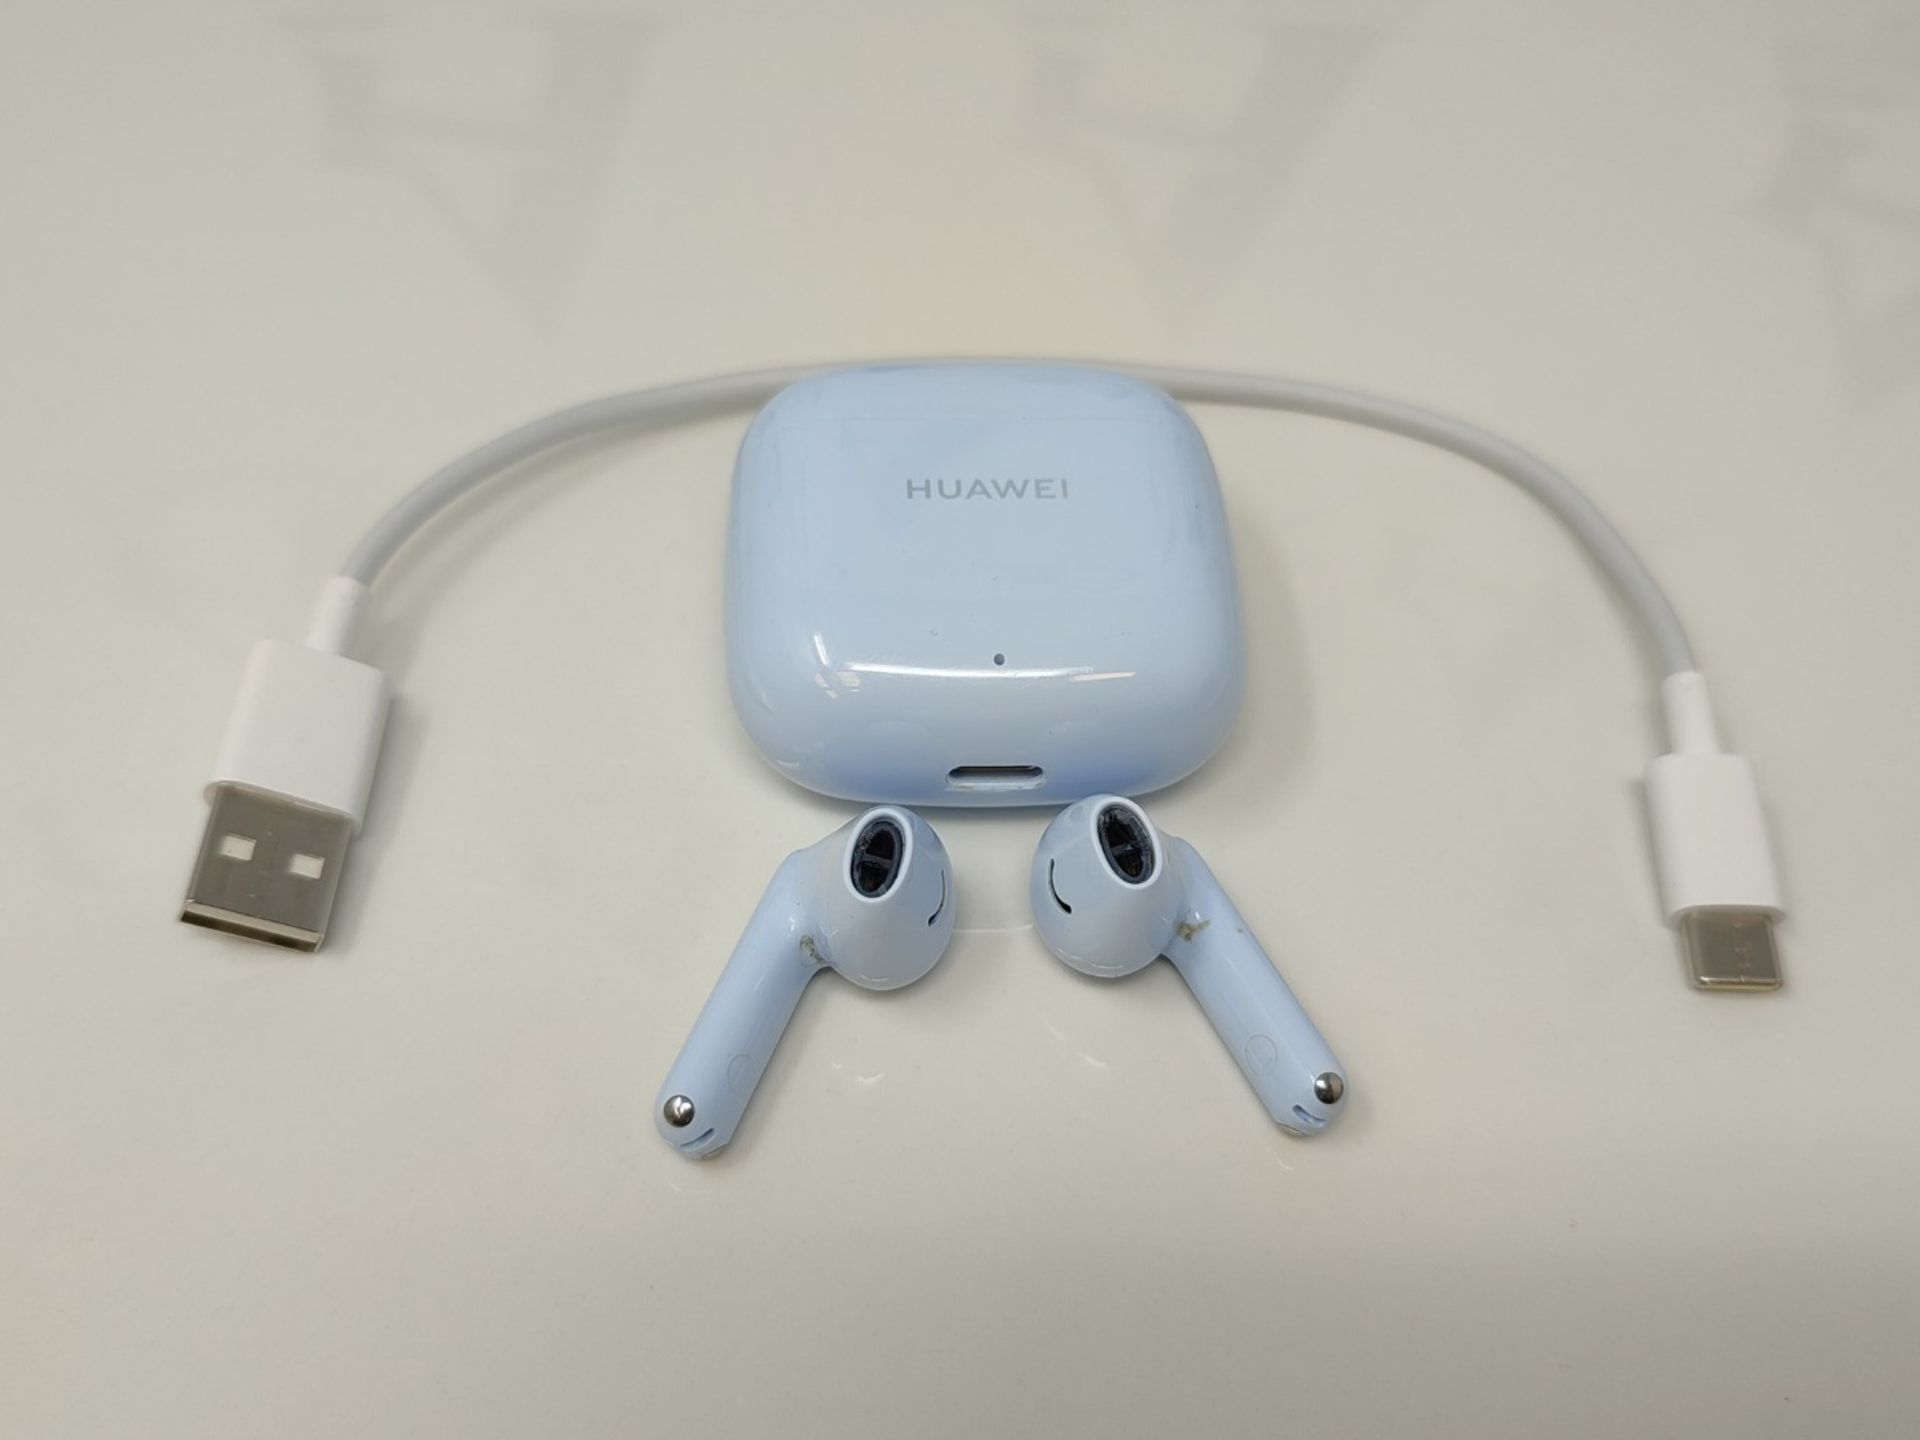 HUAWEI FreeBuds SE 2, Battery Life up to 40 Hours, IP54 Dust and Splash Resistant, Rob - Image 3 of 3